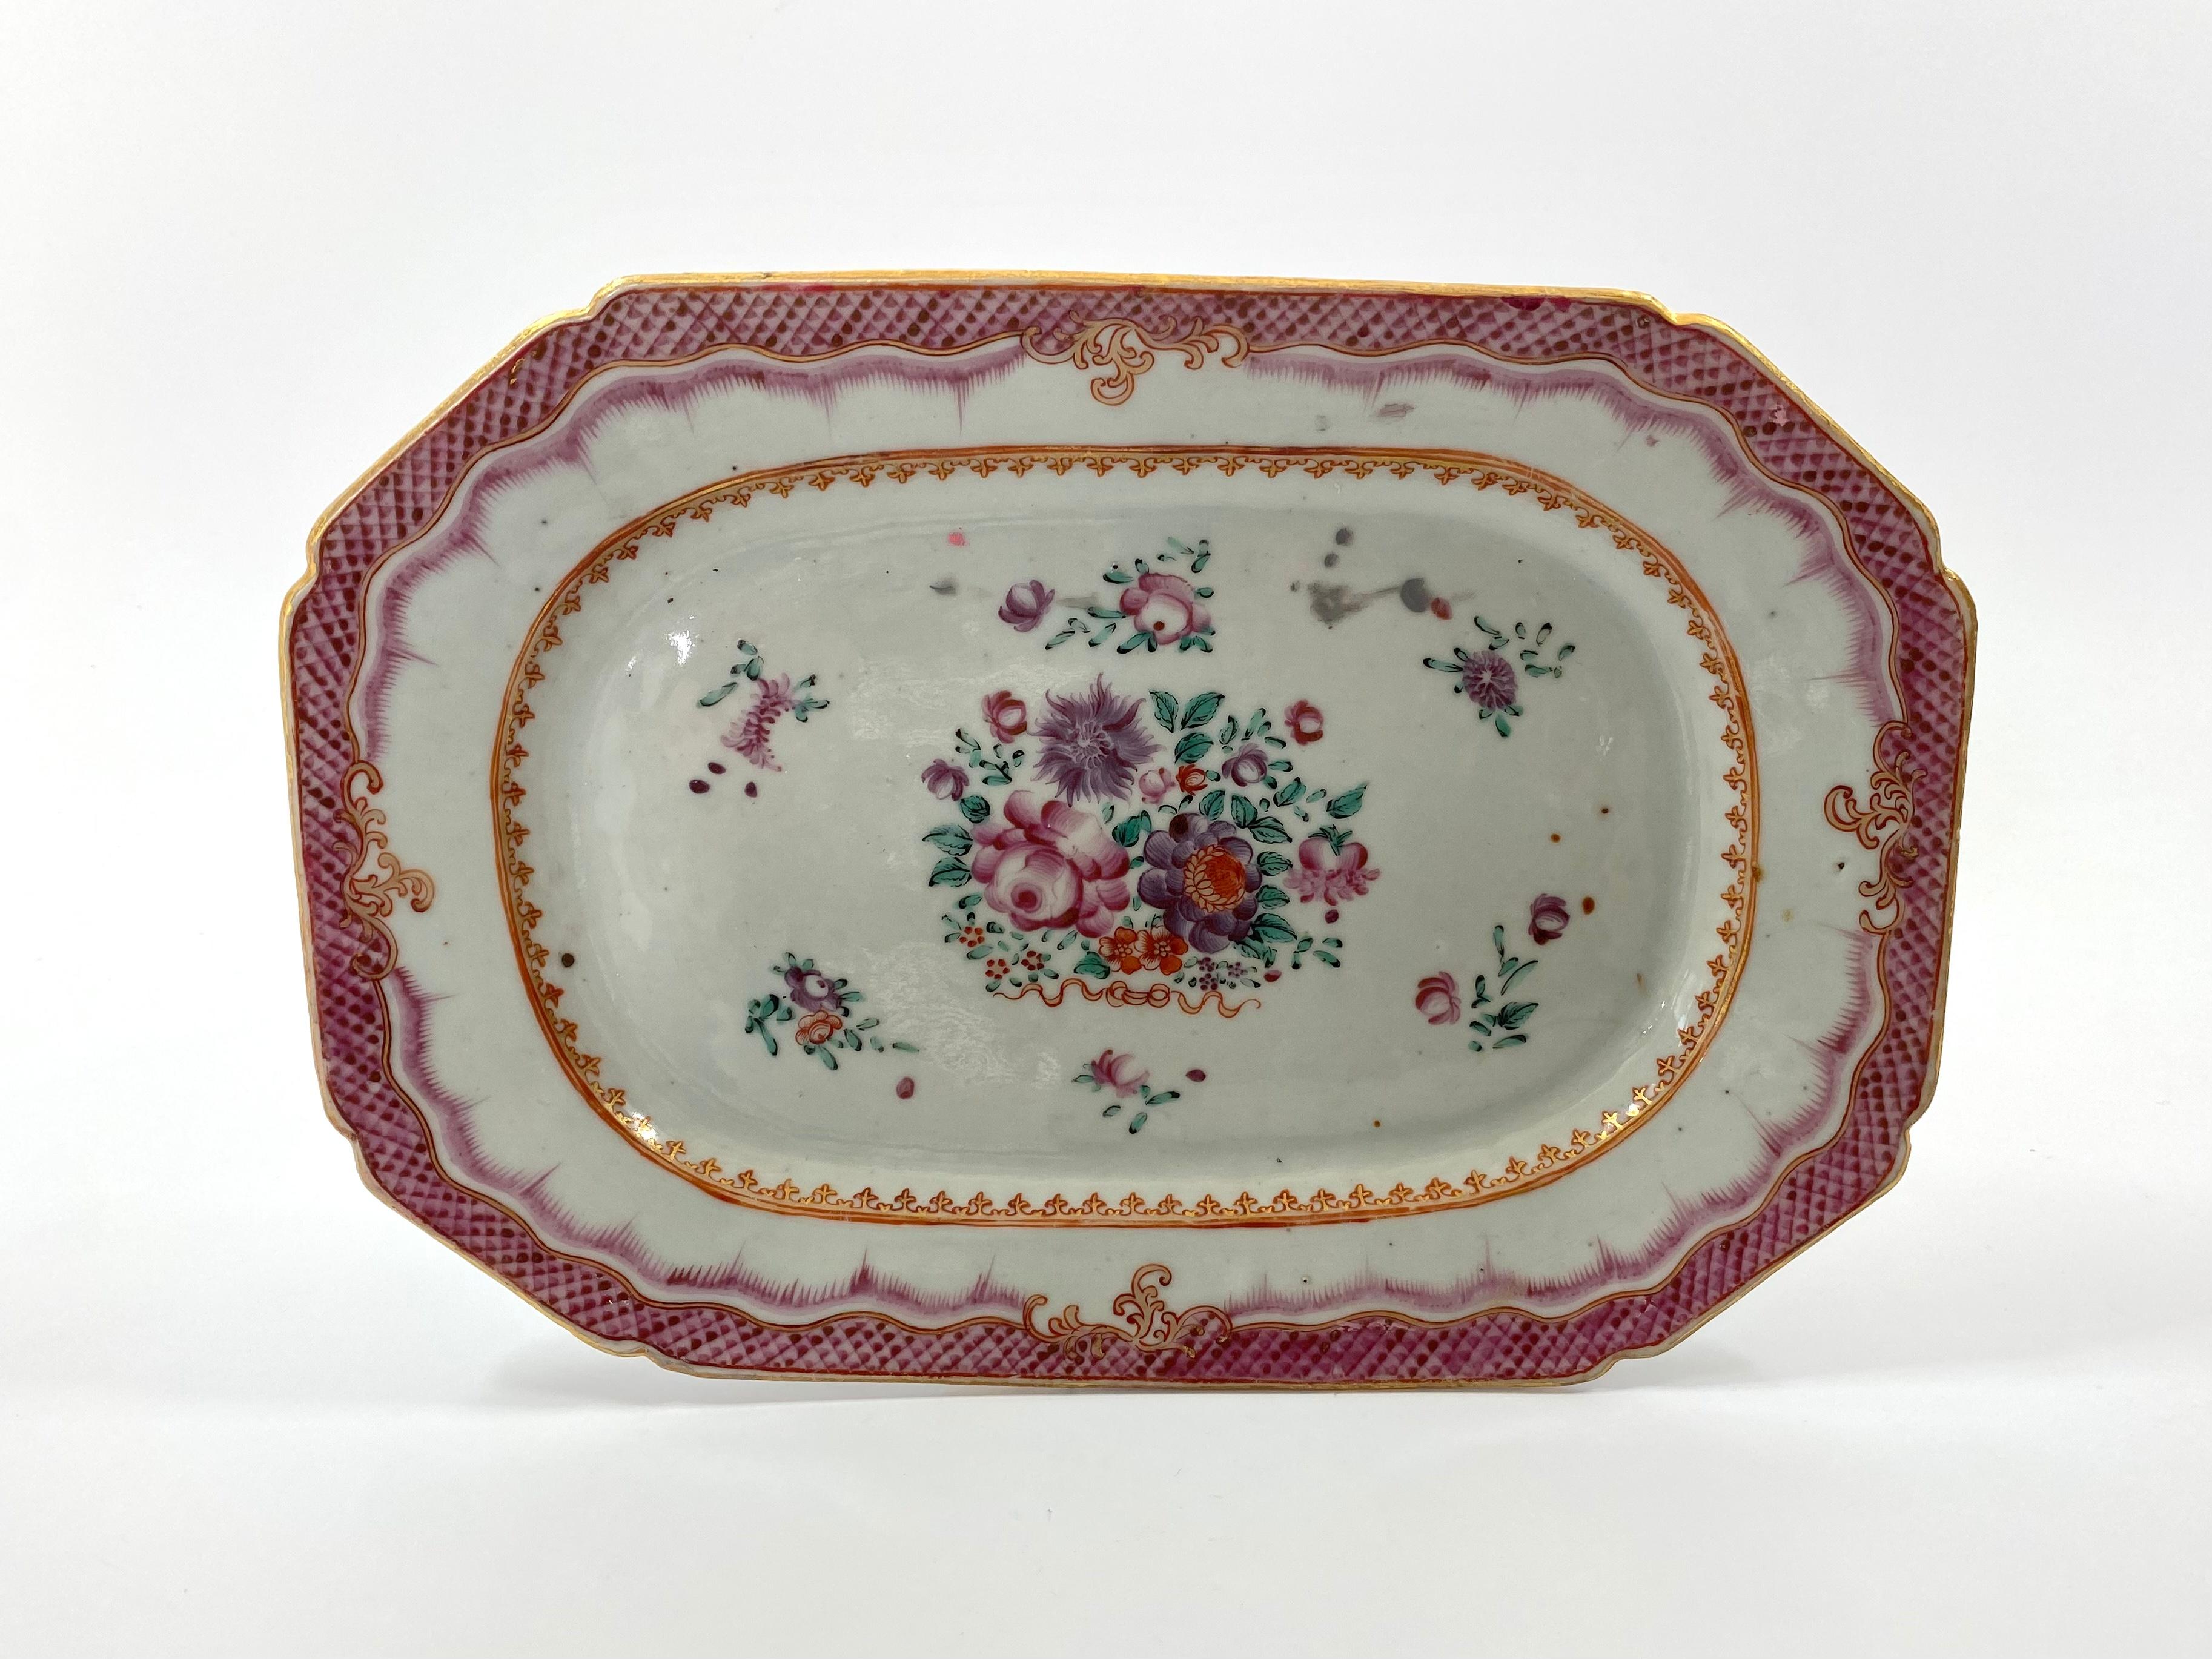 Pair of Chinese porcelain platters, c. 1770, Qianlong Period. Both rectangular platters, with canted corners. Painted in famille rose or fencai enamels, with a central spray of flowers, above a ribbon, surrounded by smaller sprigs of flowers.
The